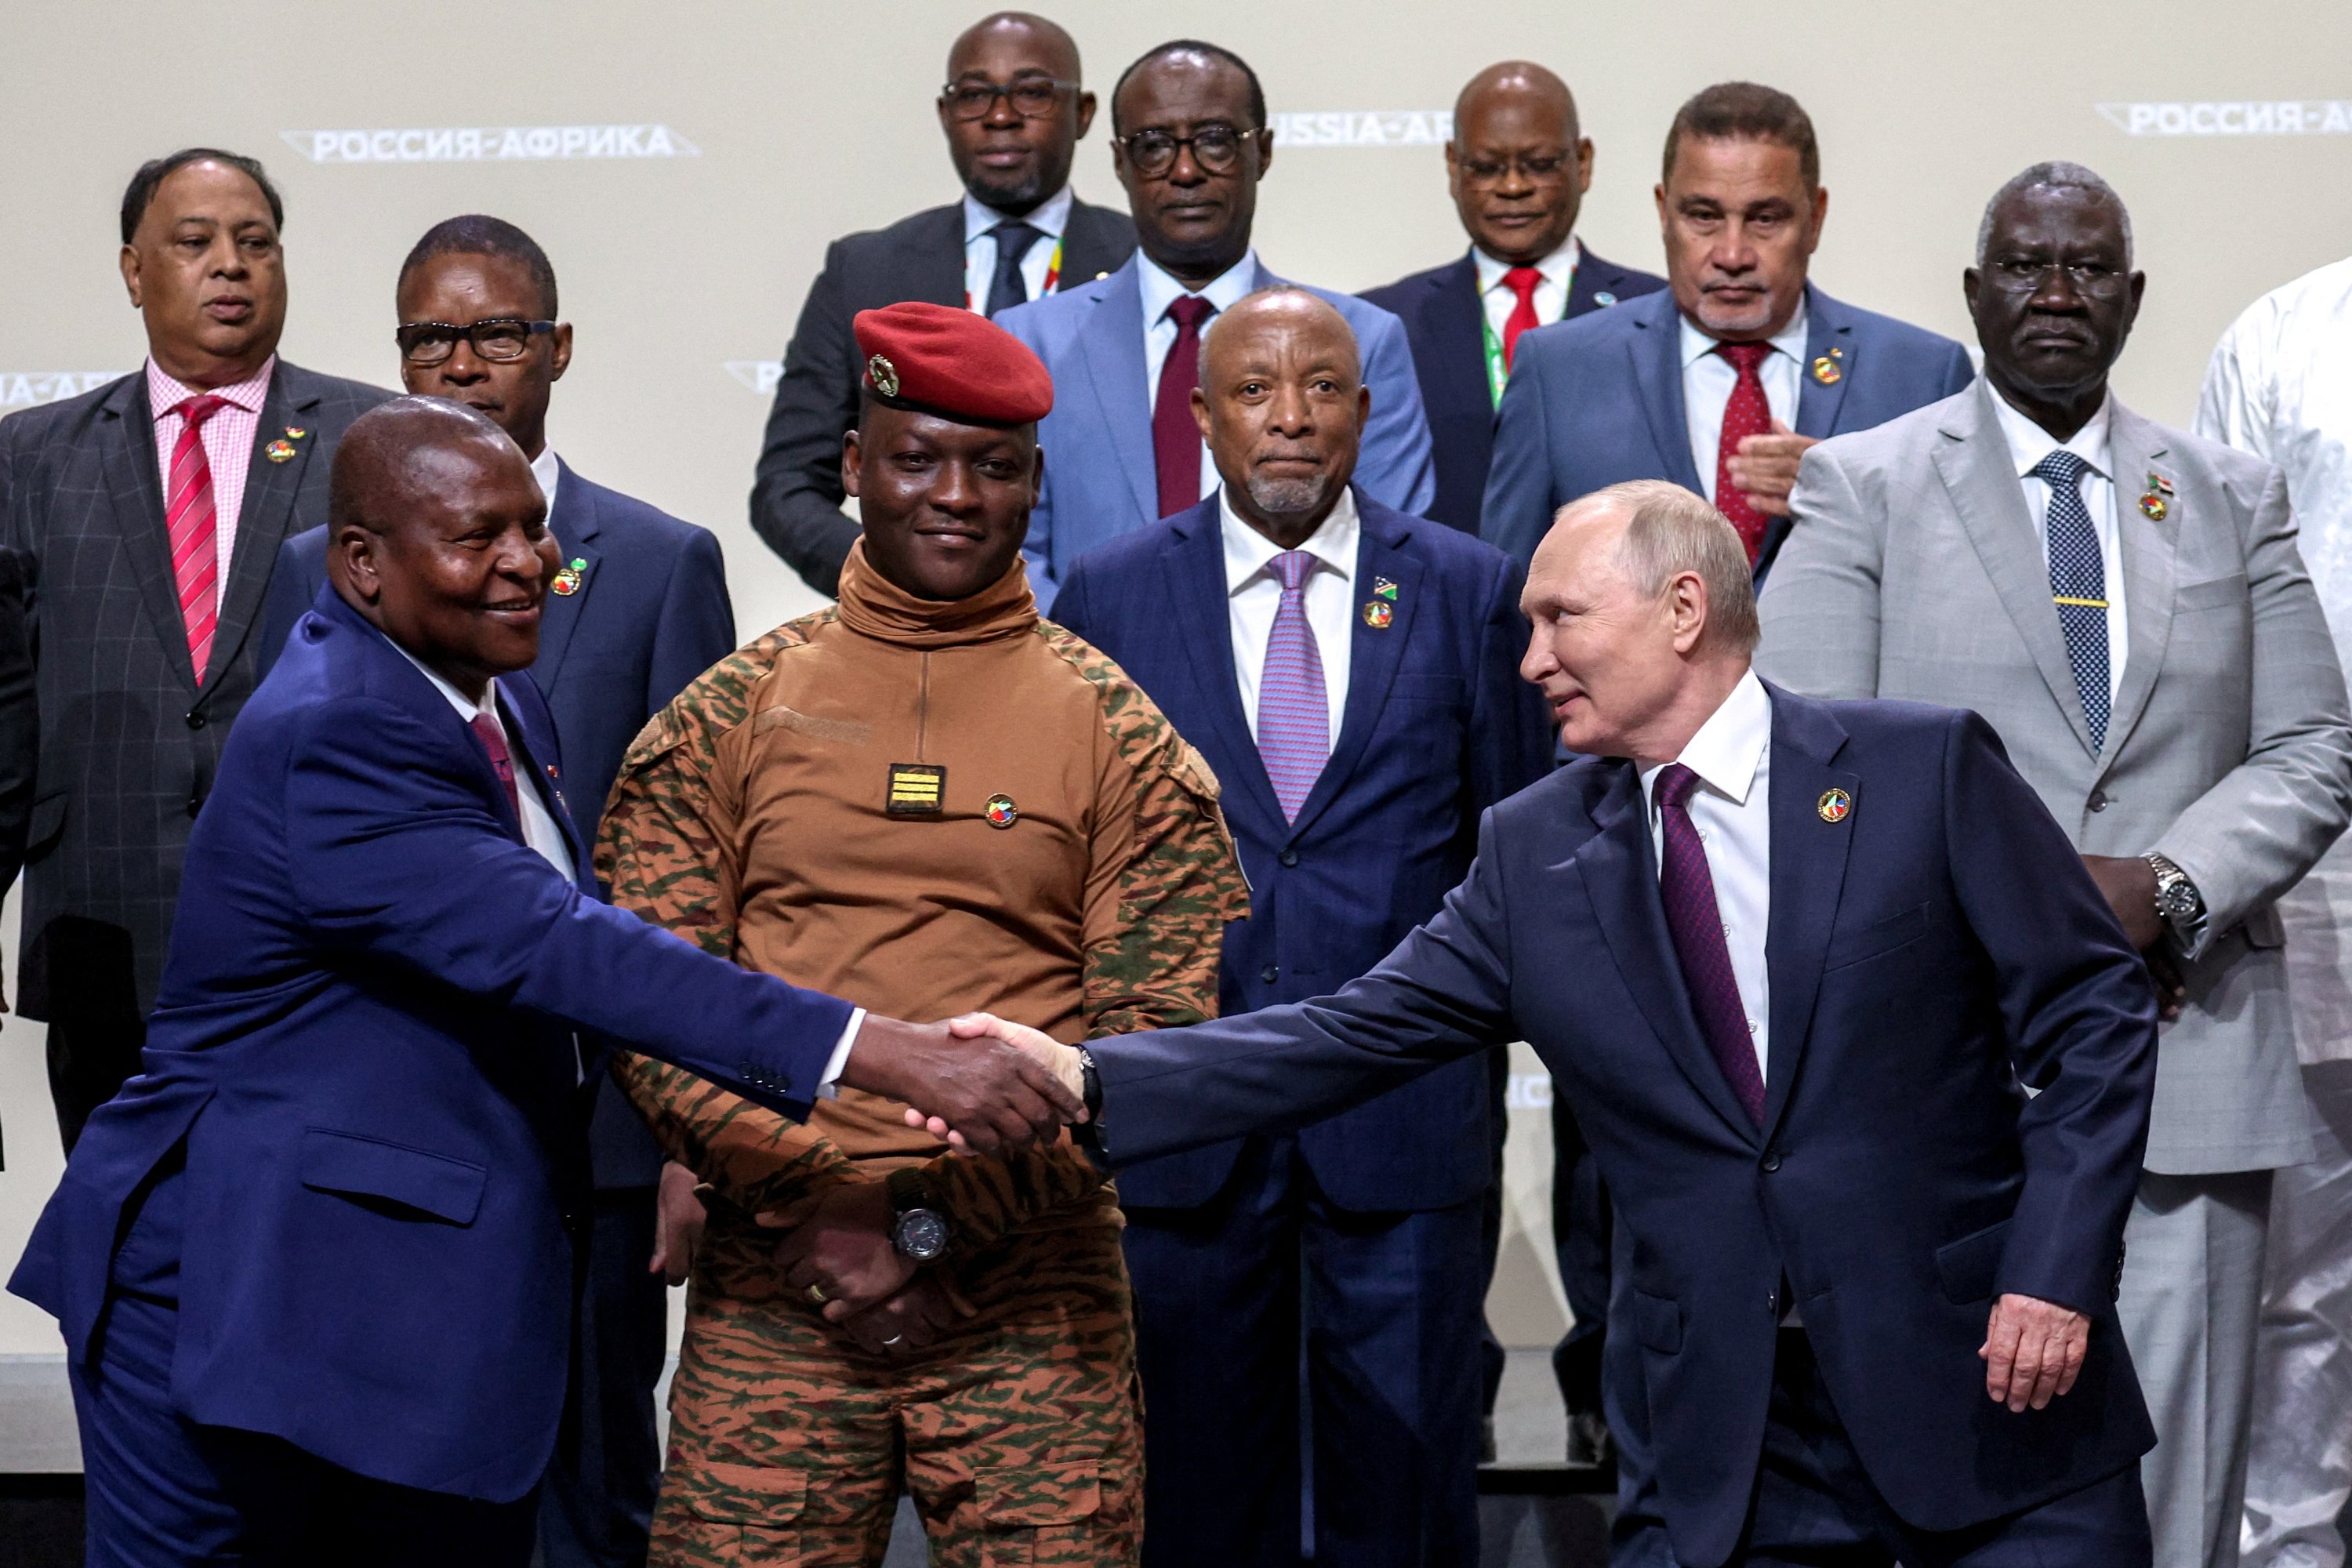 Putin woos African leaders with promises of expanding trade, other ties